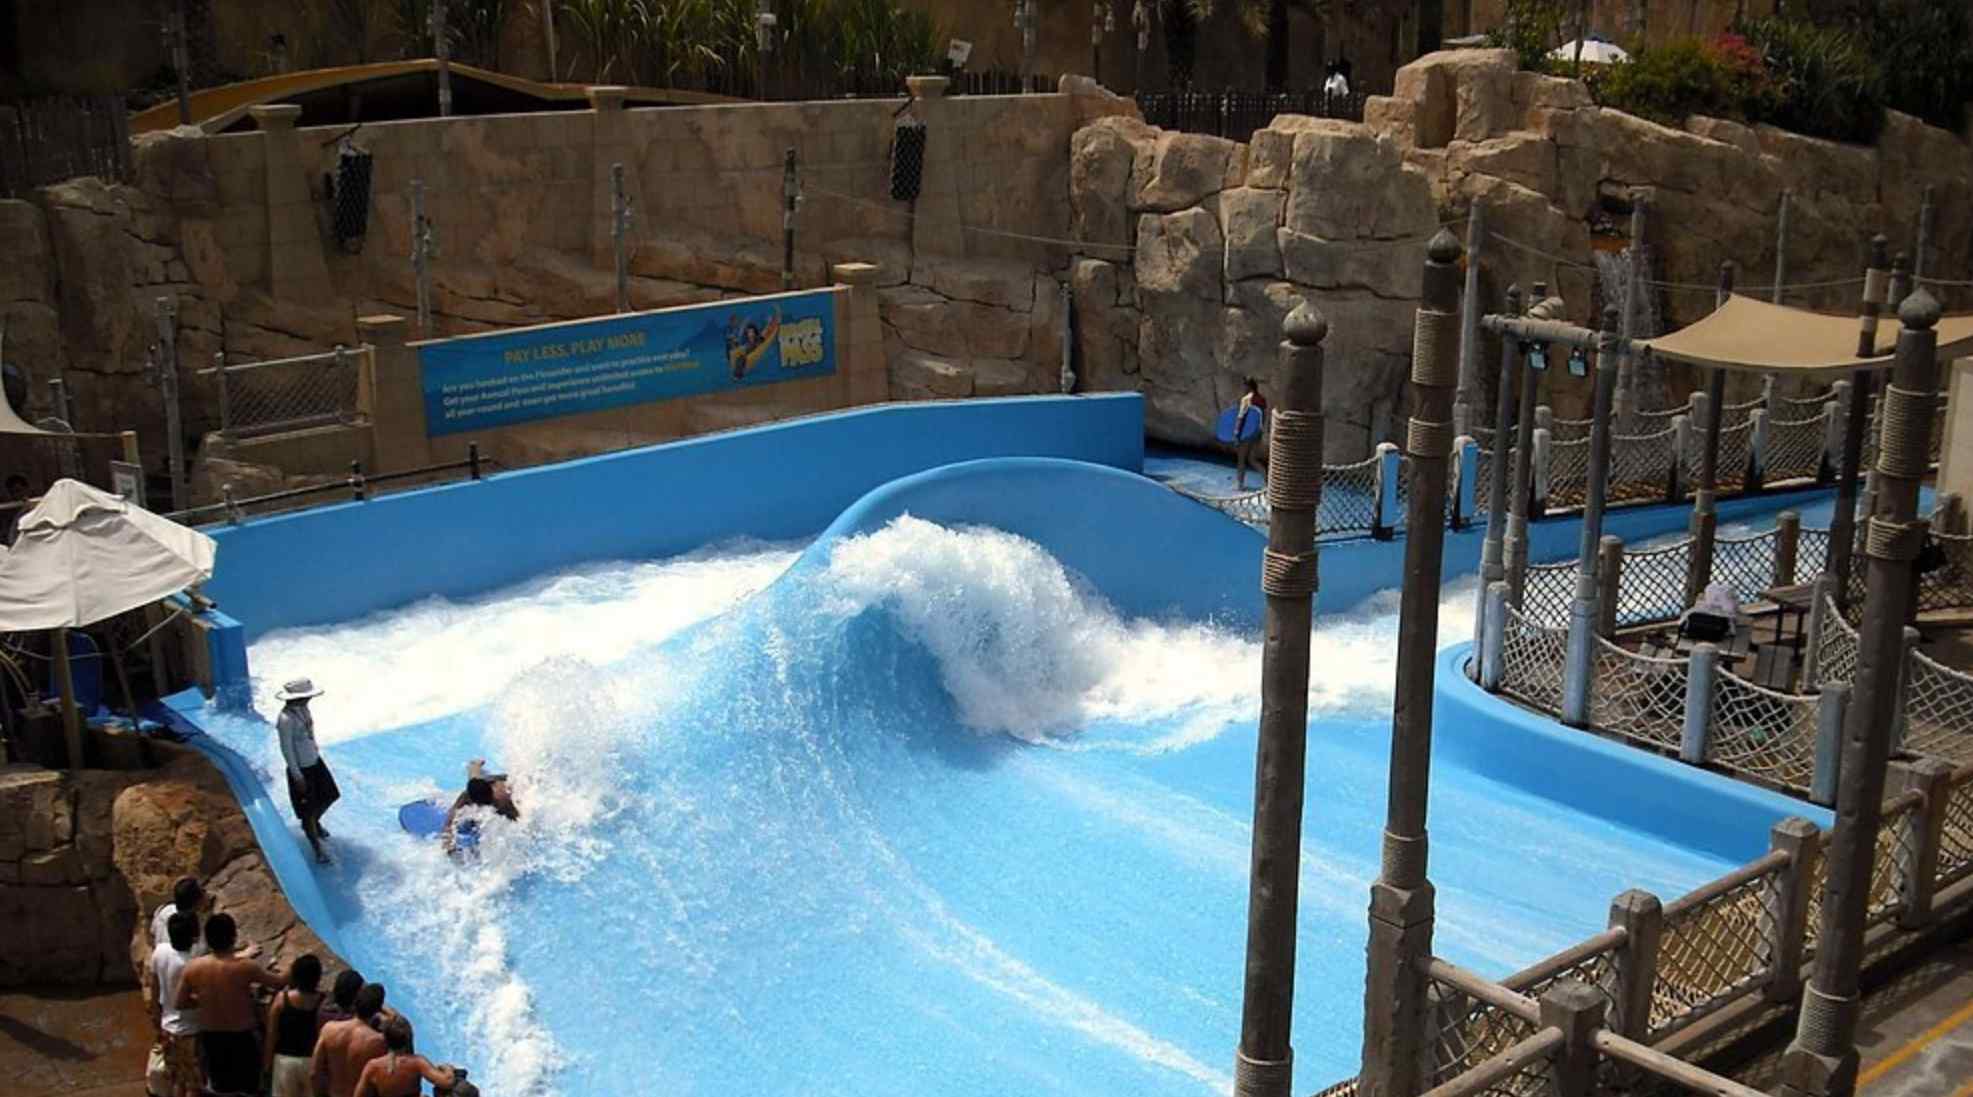 Surf the day away on Wild Wadi Water Park's two FlowRiders.